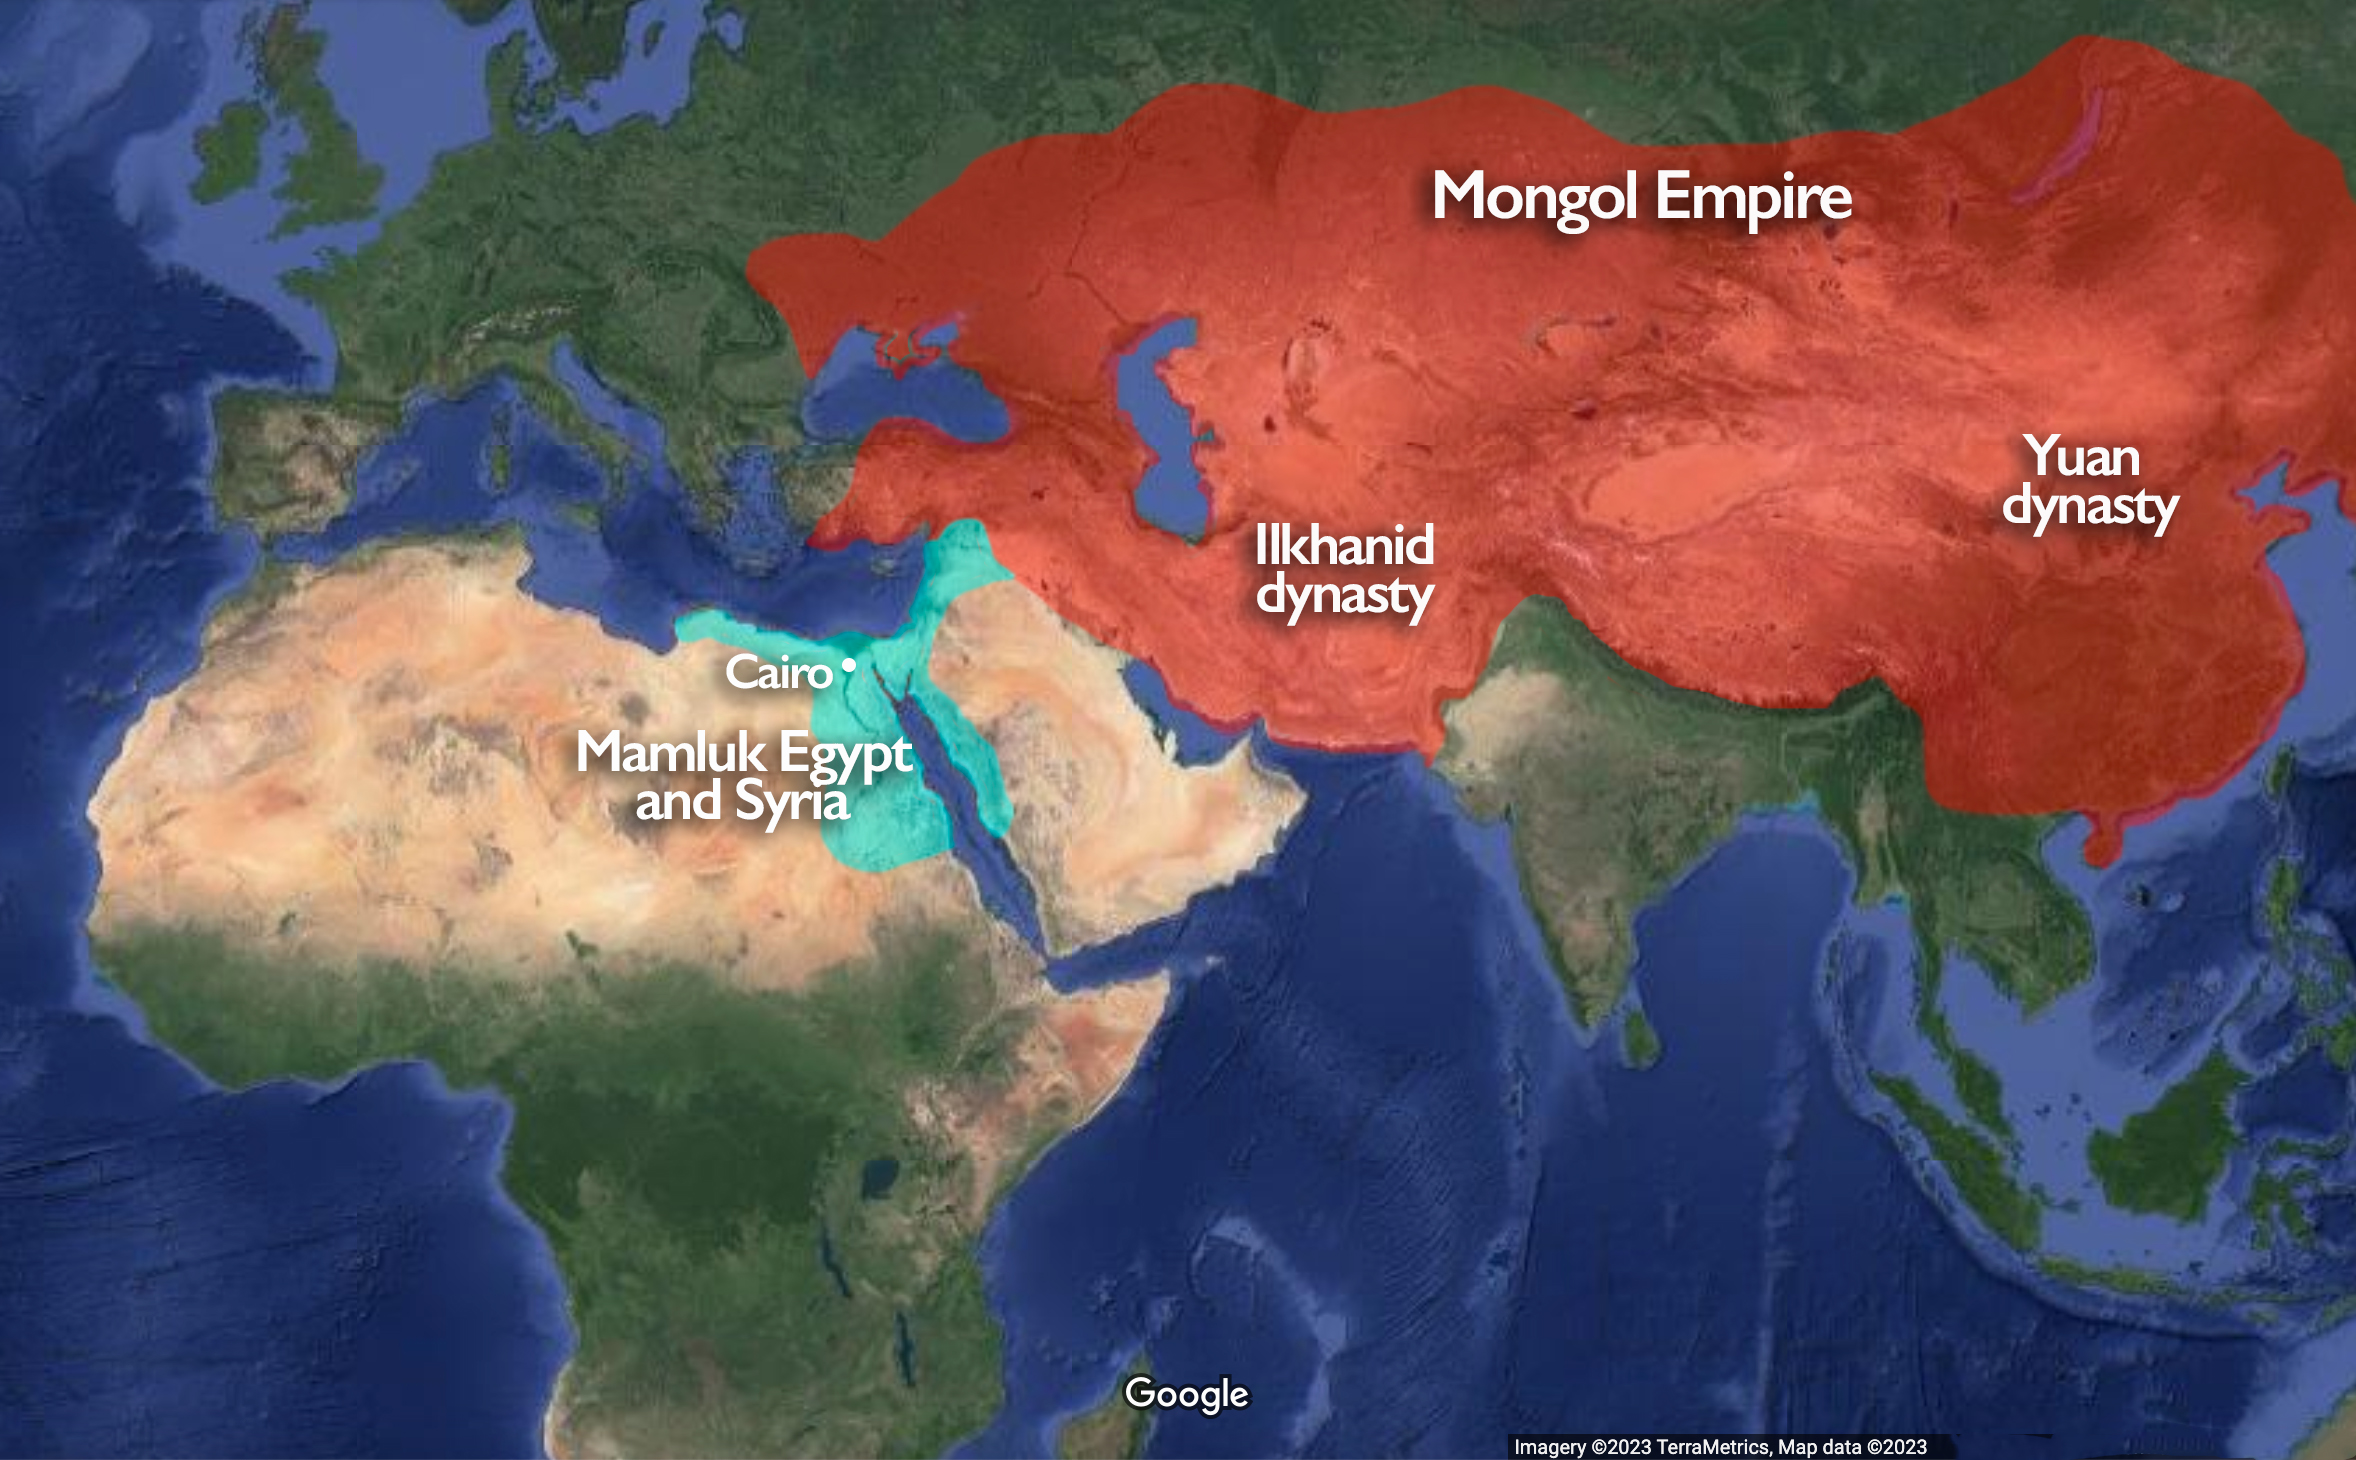 Map of West and East Asia in the 14th century (underlying map © Google)